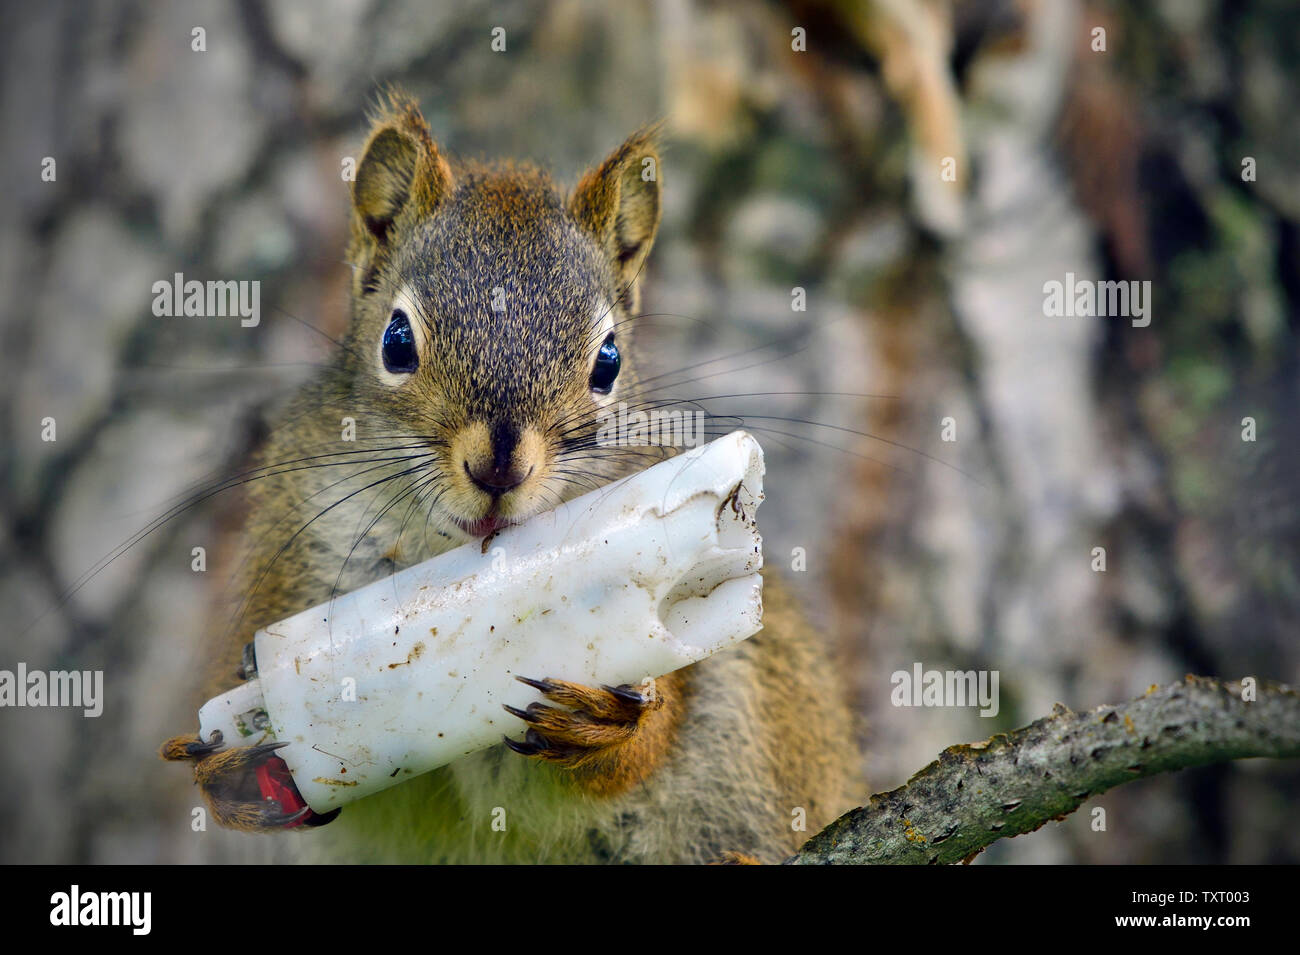 A close up image of a red squirrel ,'Tamiasciurus hudsonicus', playing with a discarded disposable lighter Stock Photo